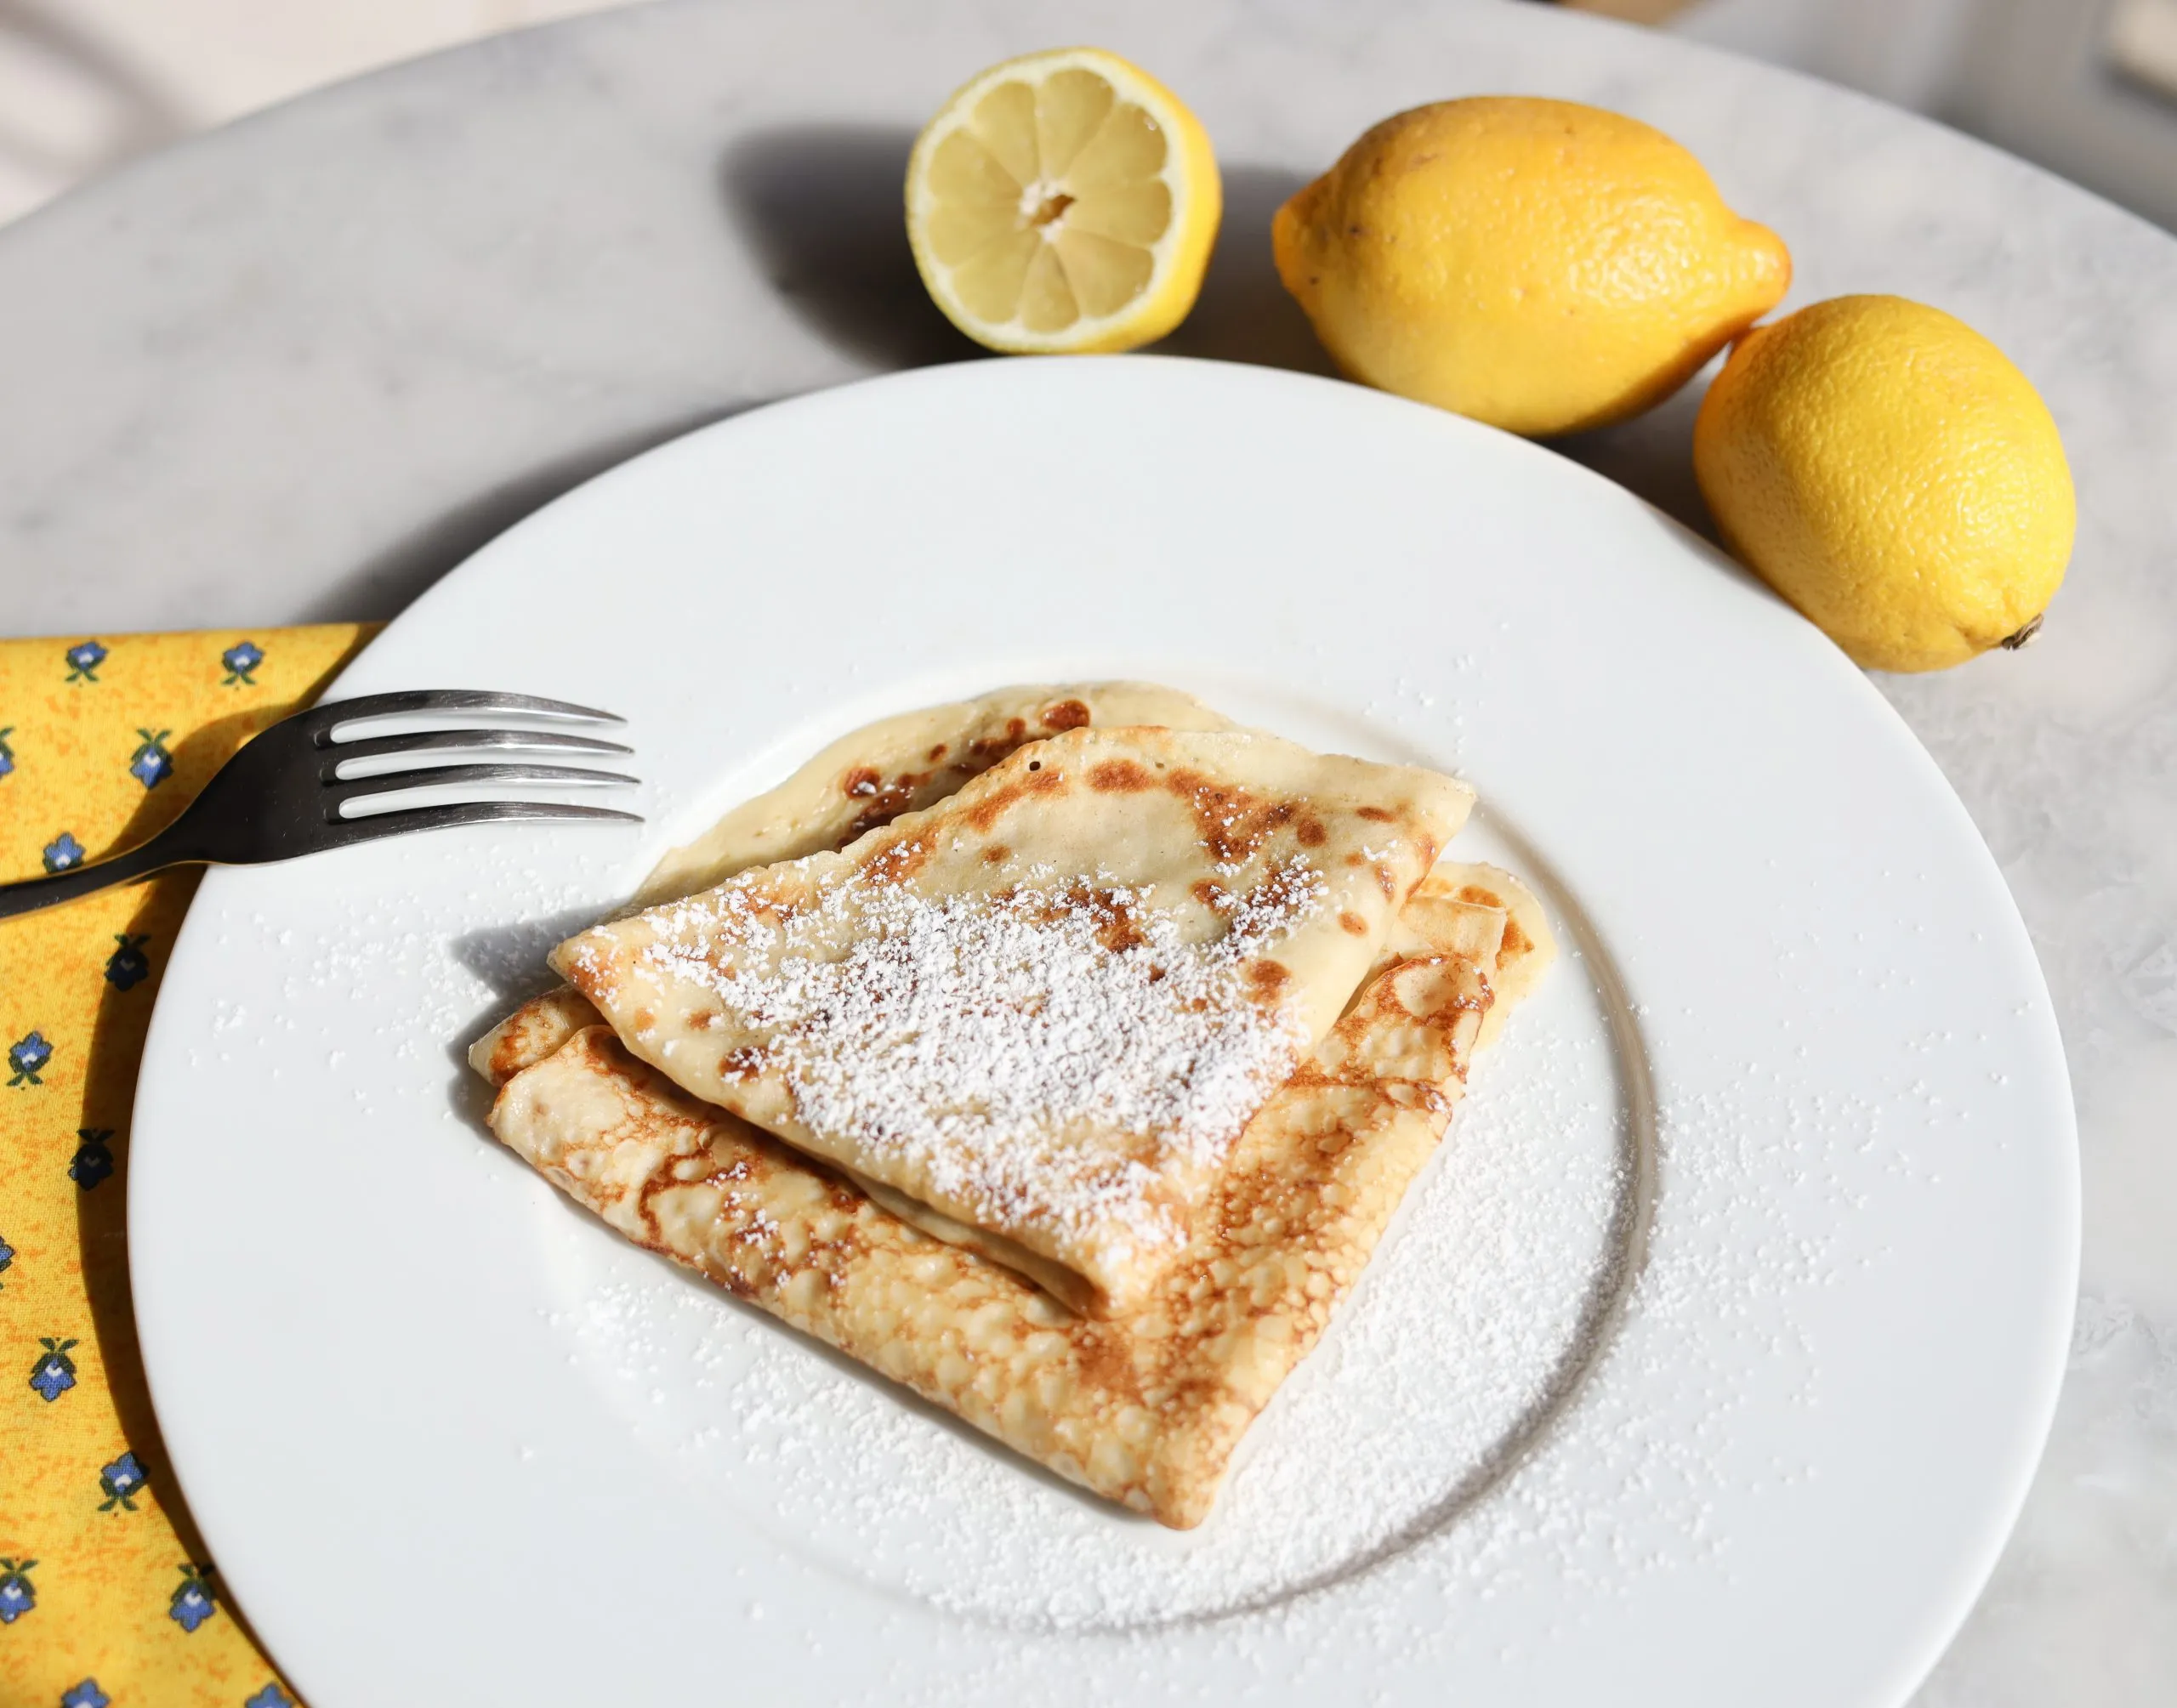 lemons surround a plate of fresh made crêpes with powdered sugar